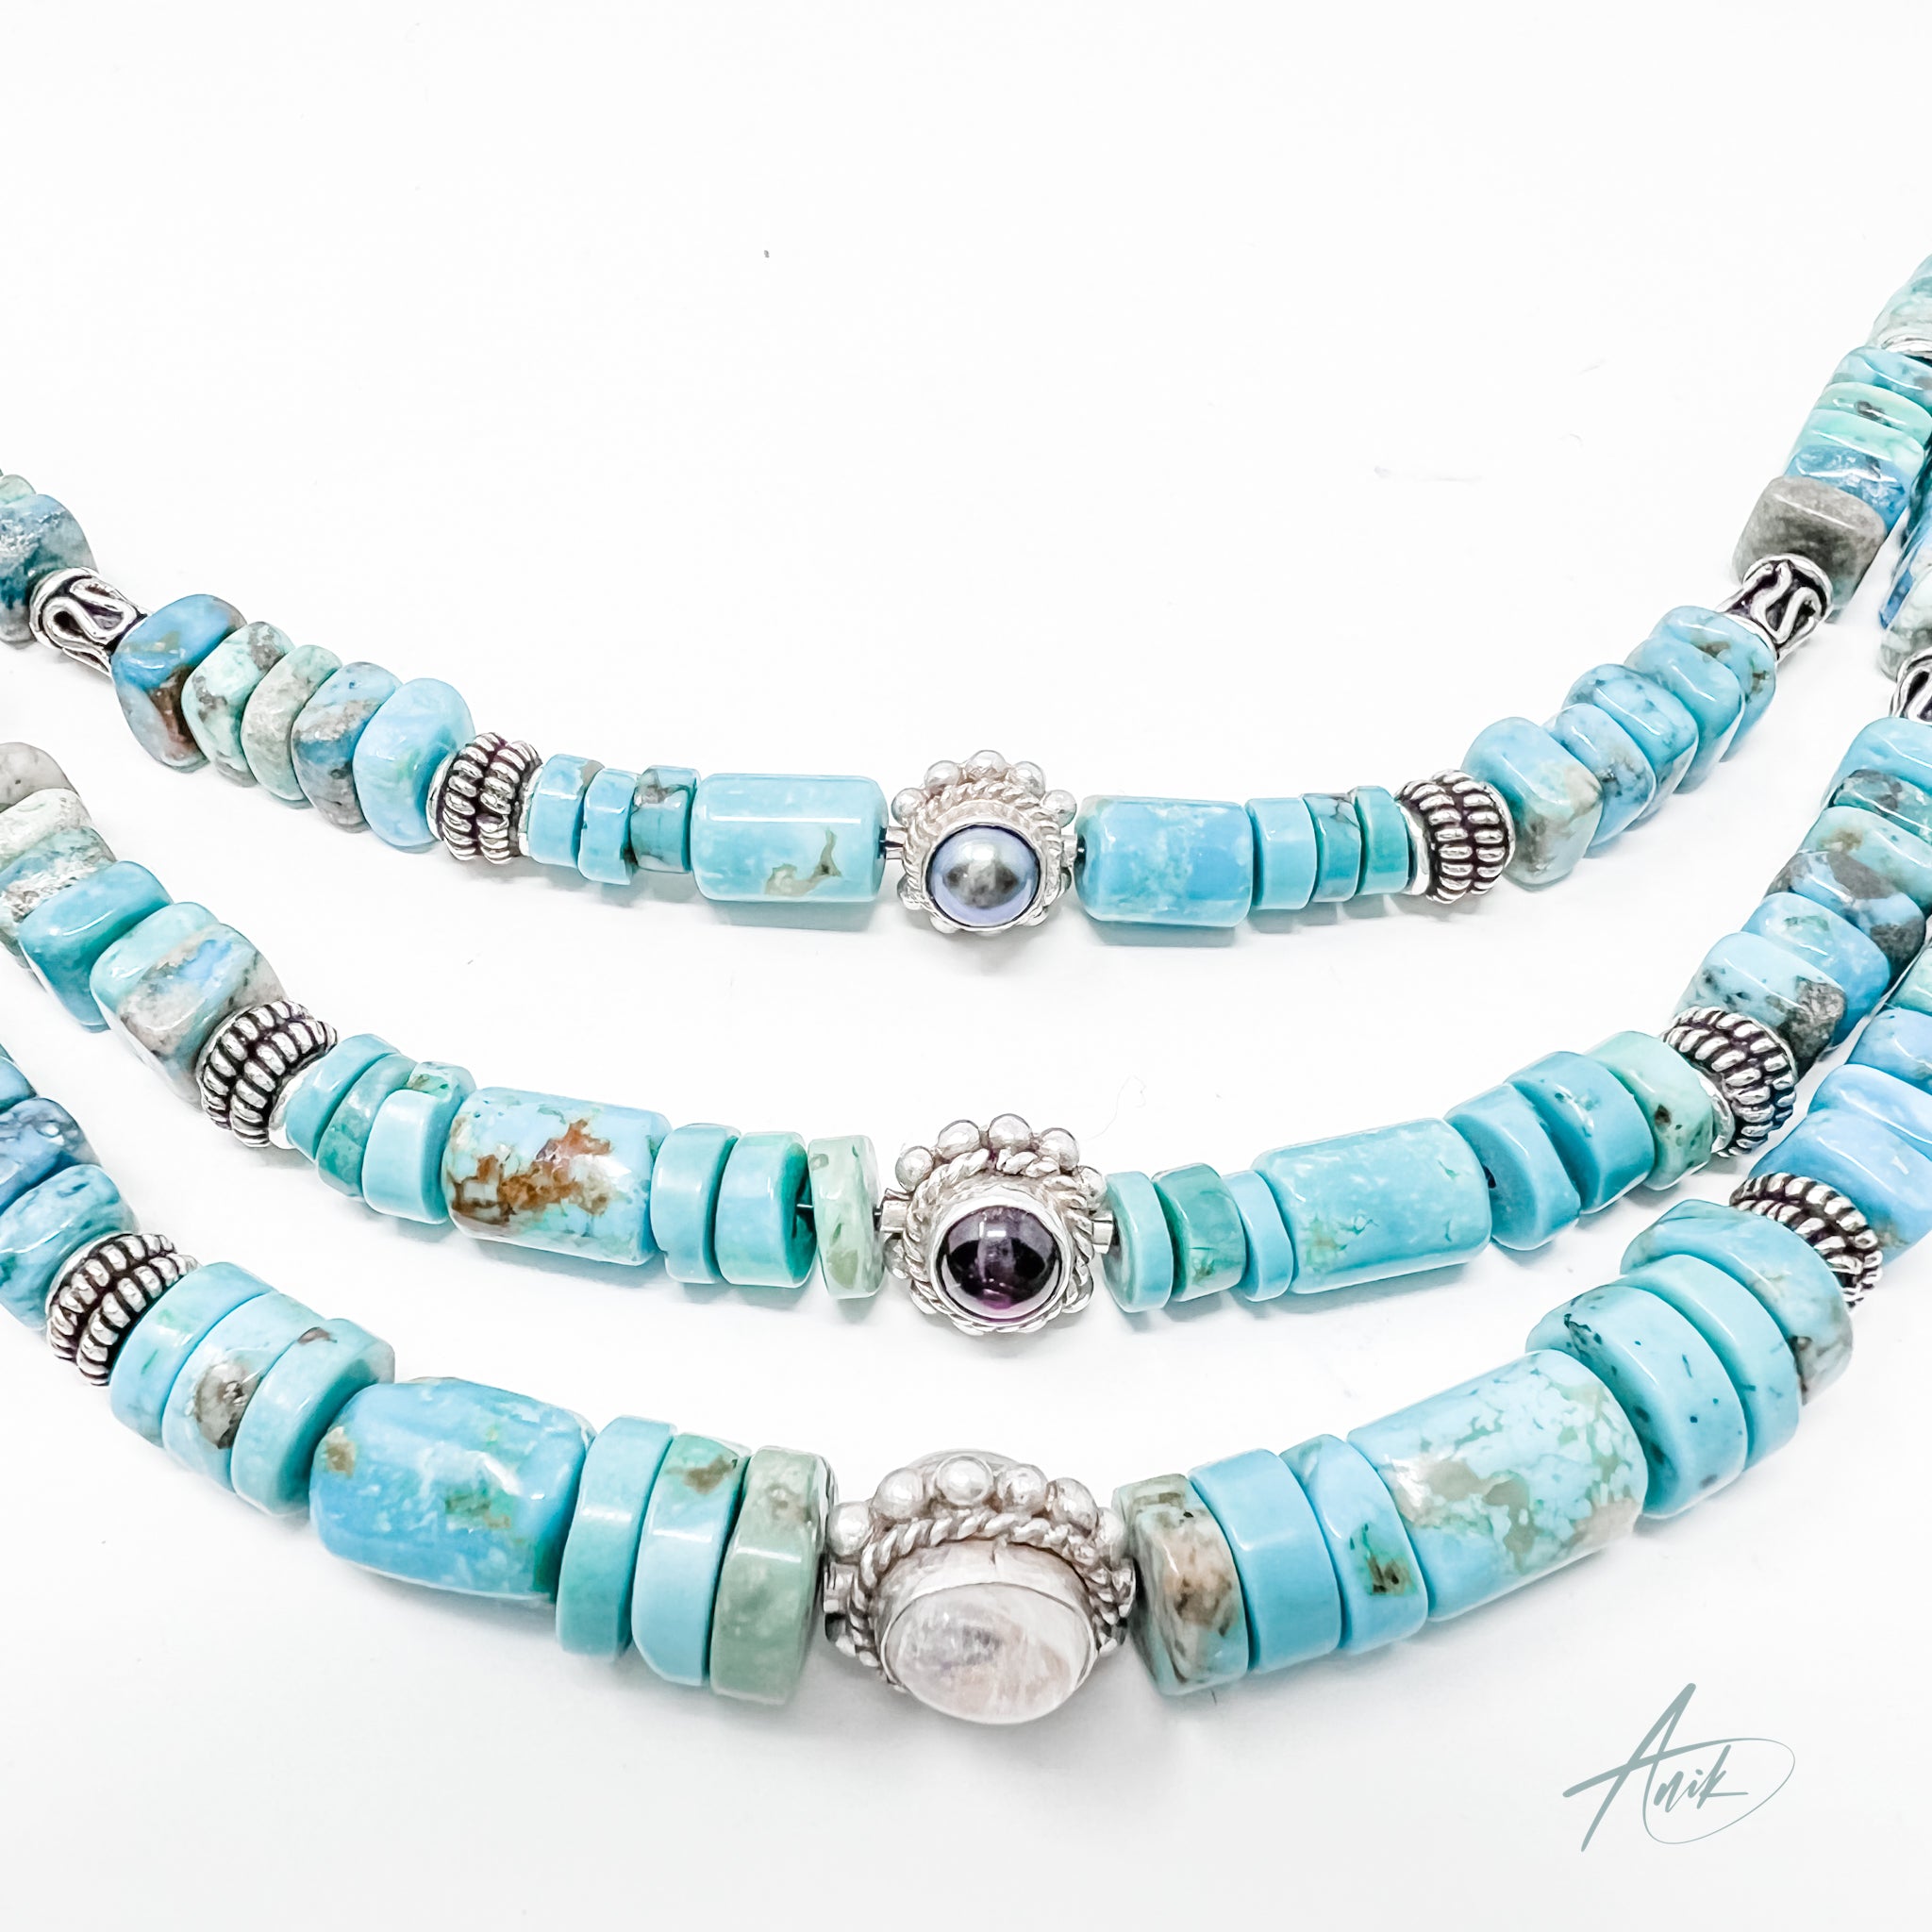 Turquoise Designs - Modern, Fresh and Unexpected